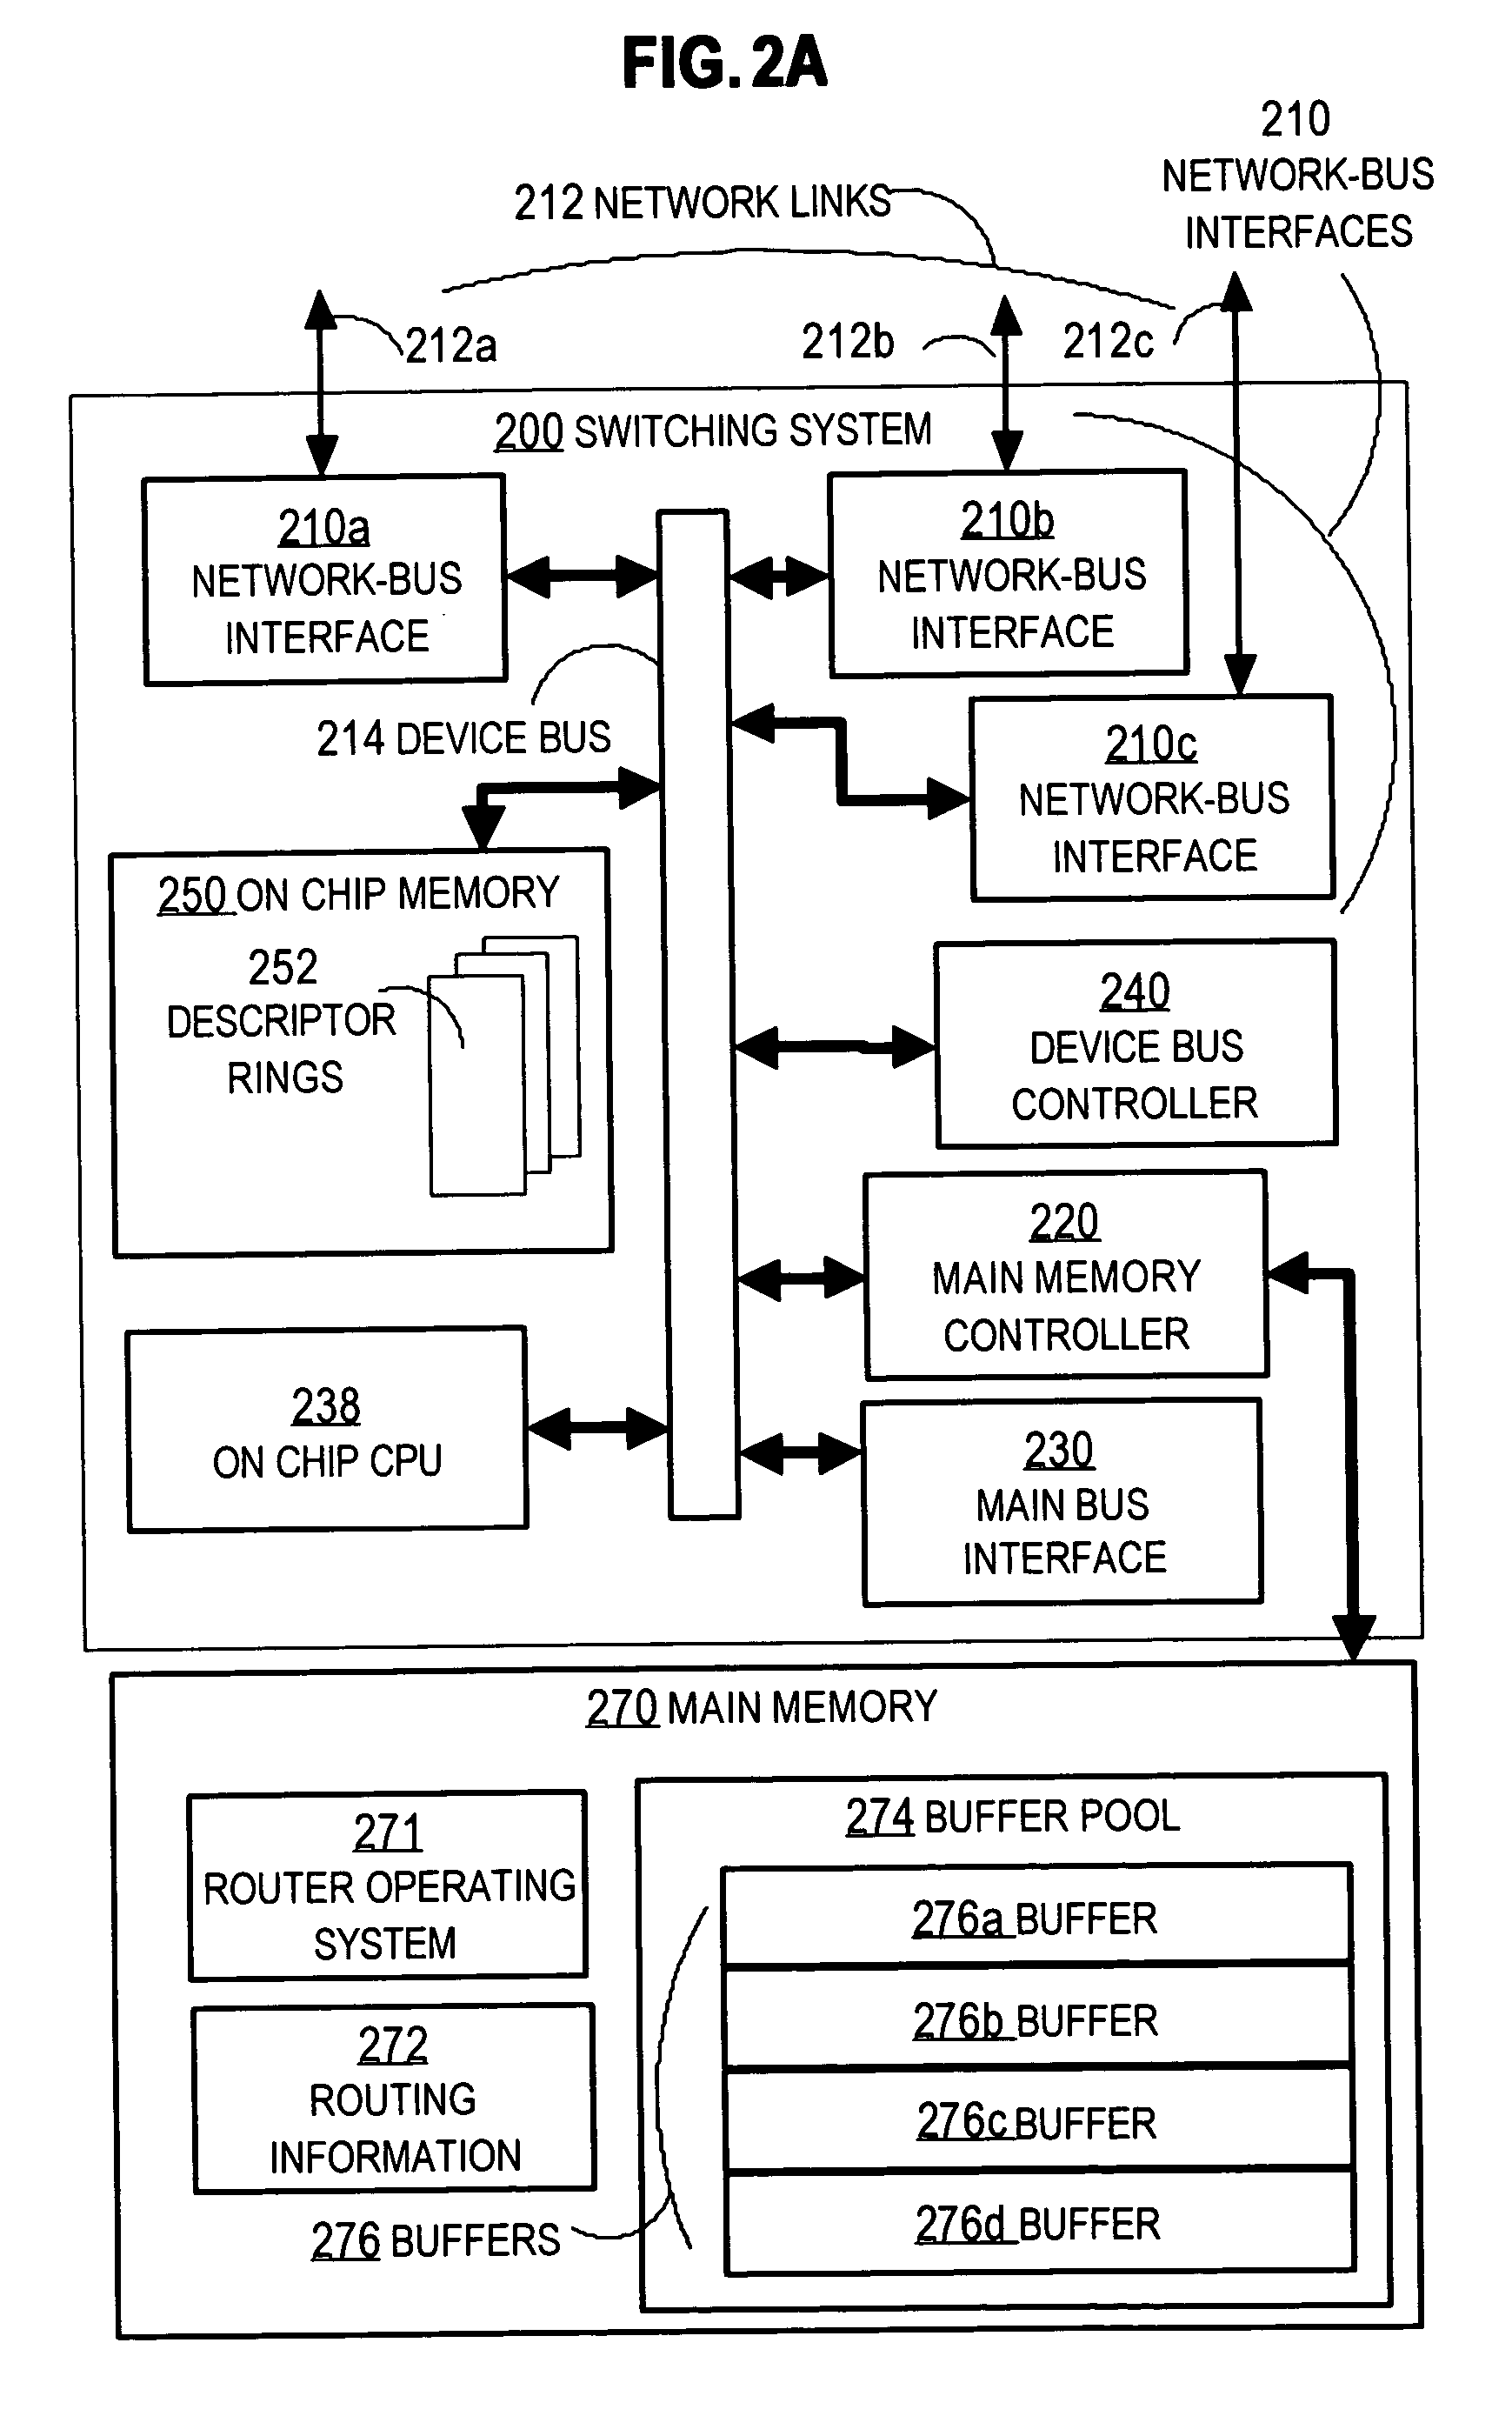 Method and apparatus for classifying a network protocol and aligning a network protocol header relative to cache line boundary